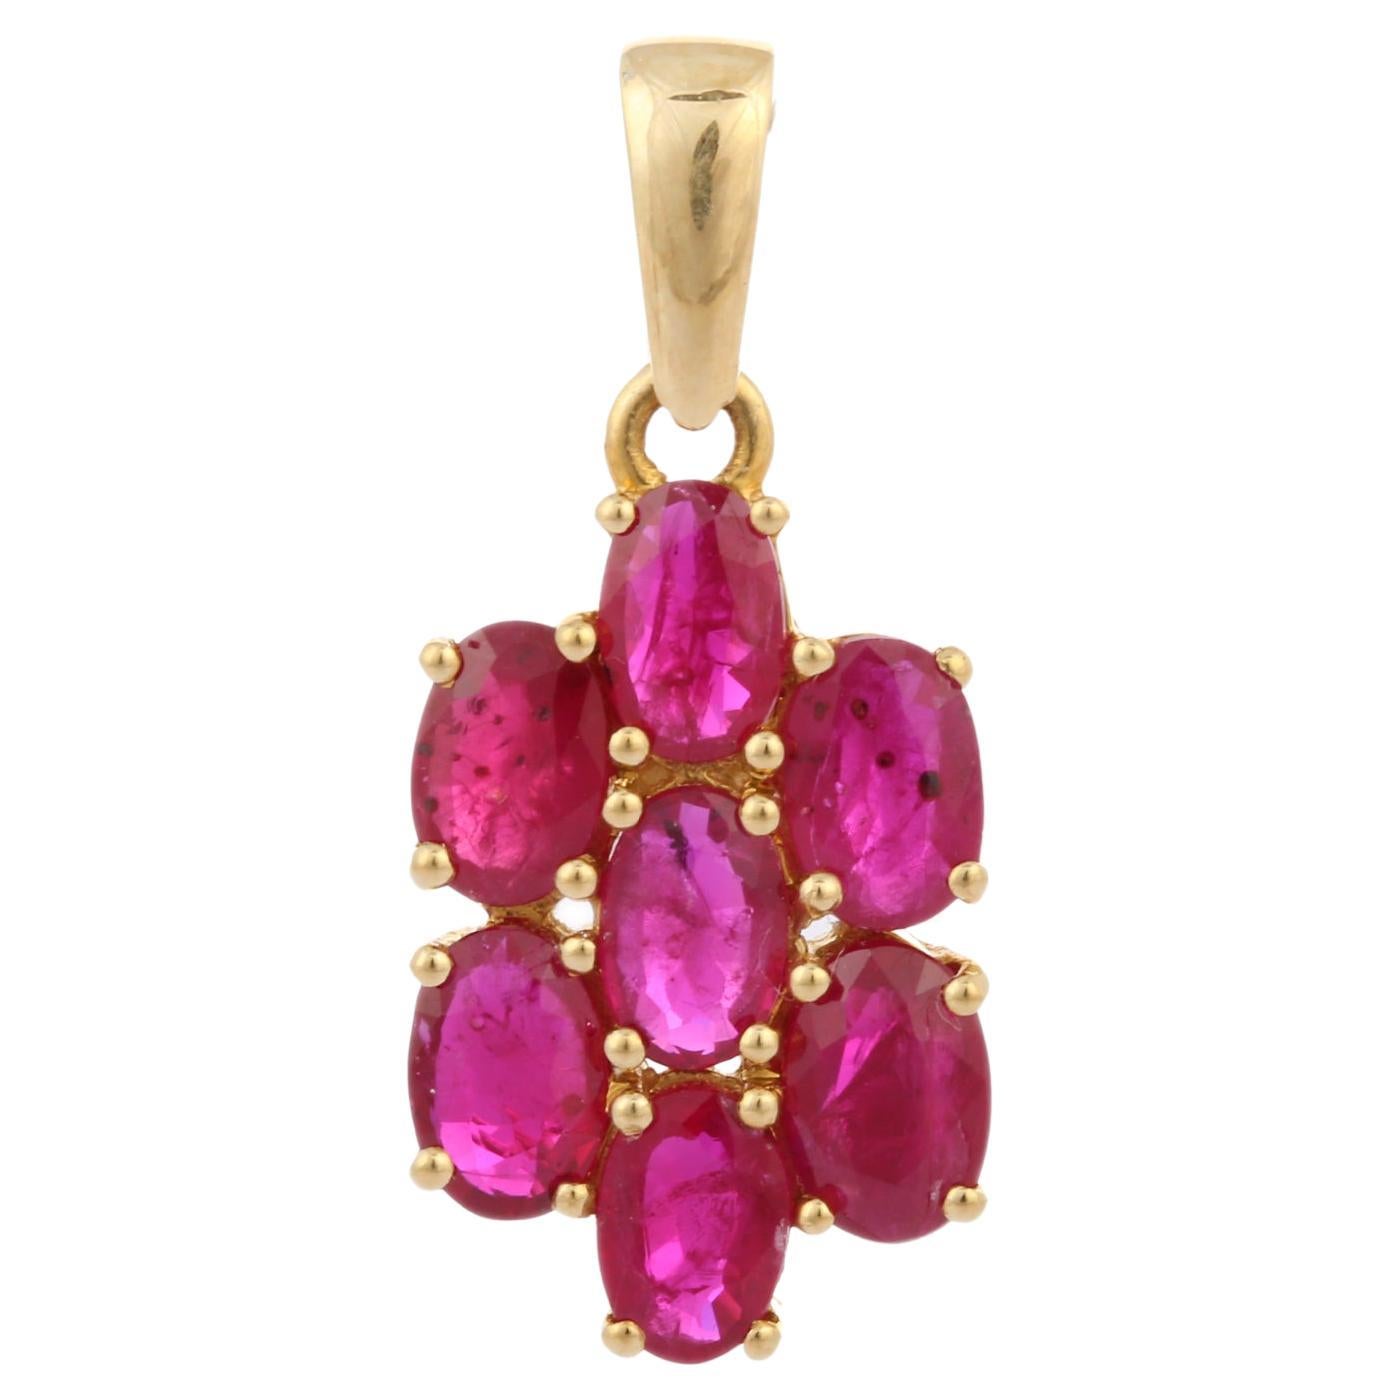 3.02 ct Alluring Oval Cut Ruby Flower Pendant in 14K Yellow Gold, Ruby Pendant